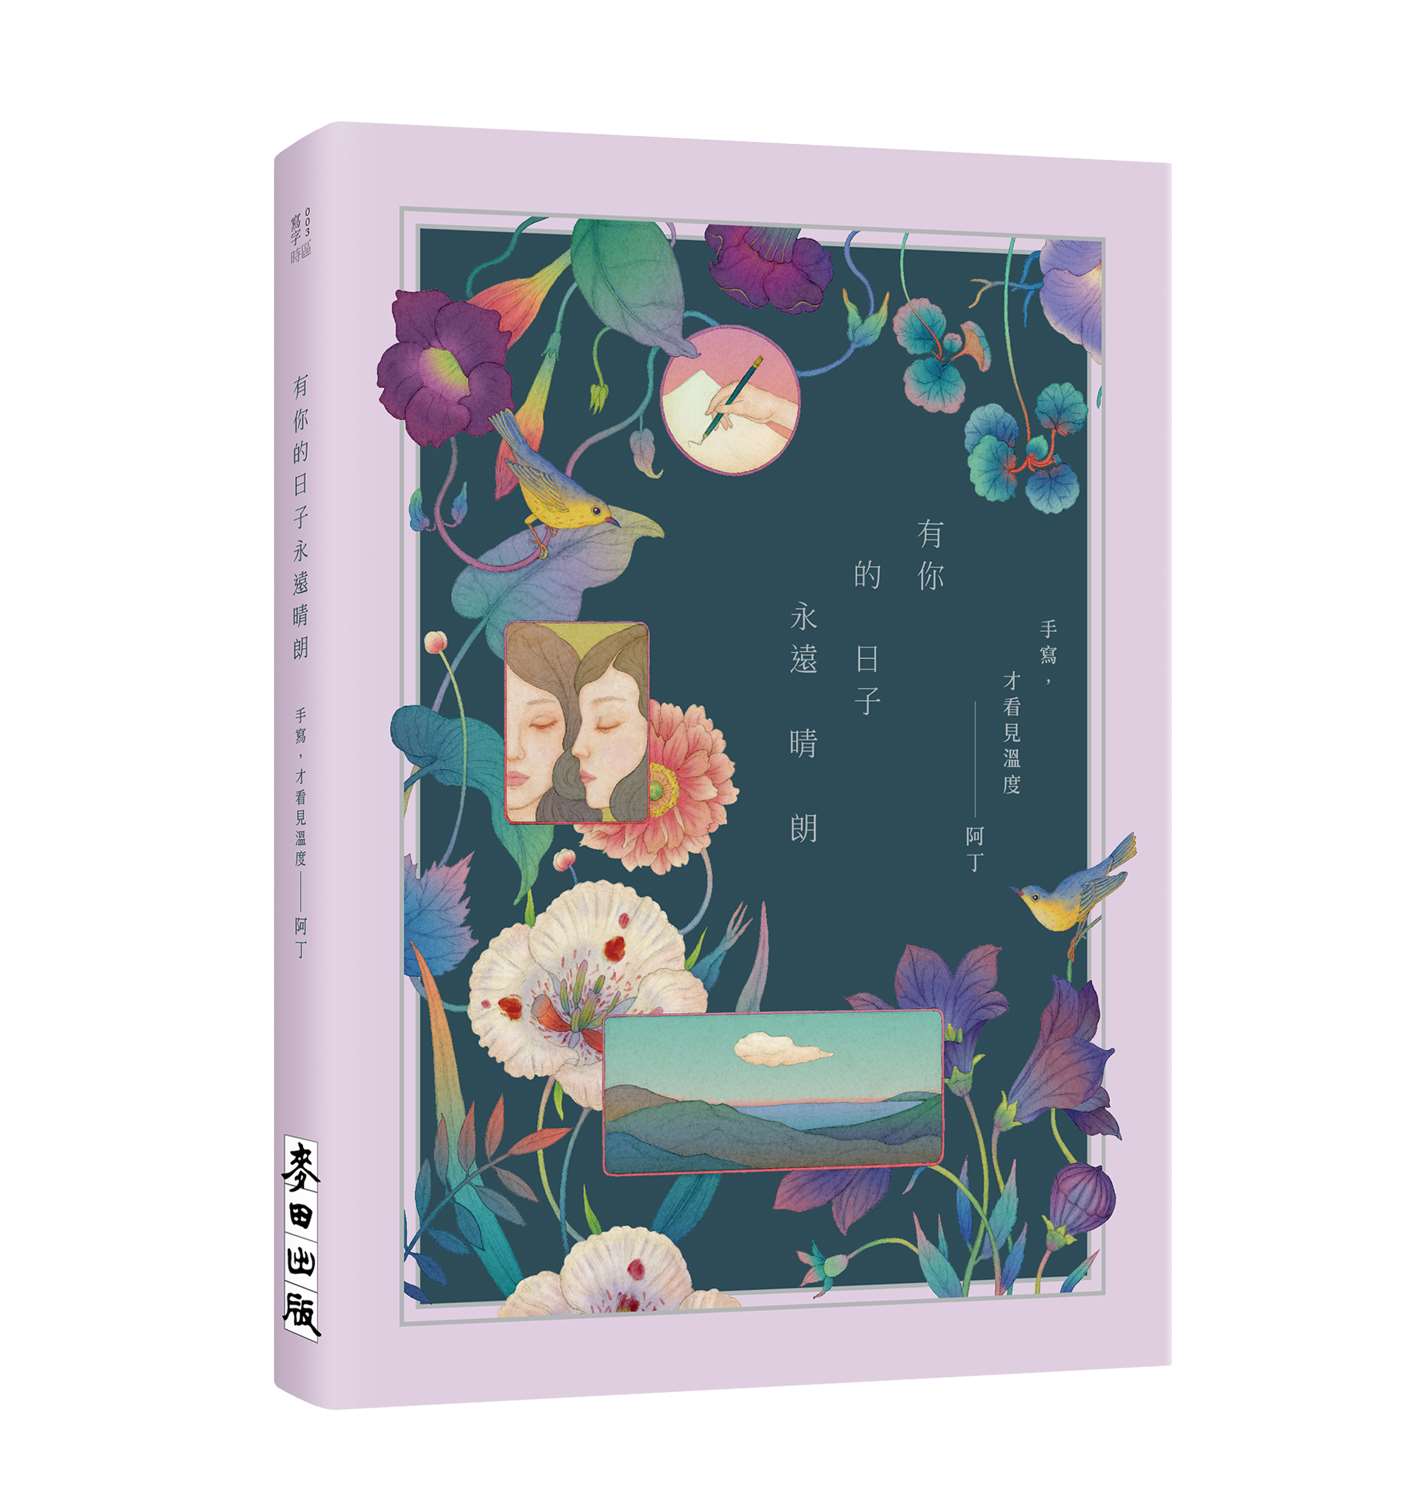 Whooli Chen, Book cover with female characters by Whooli Chen